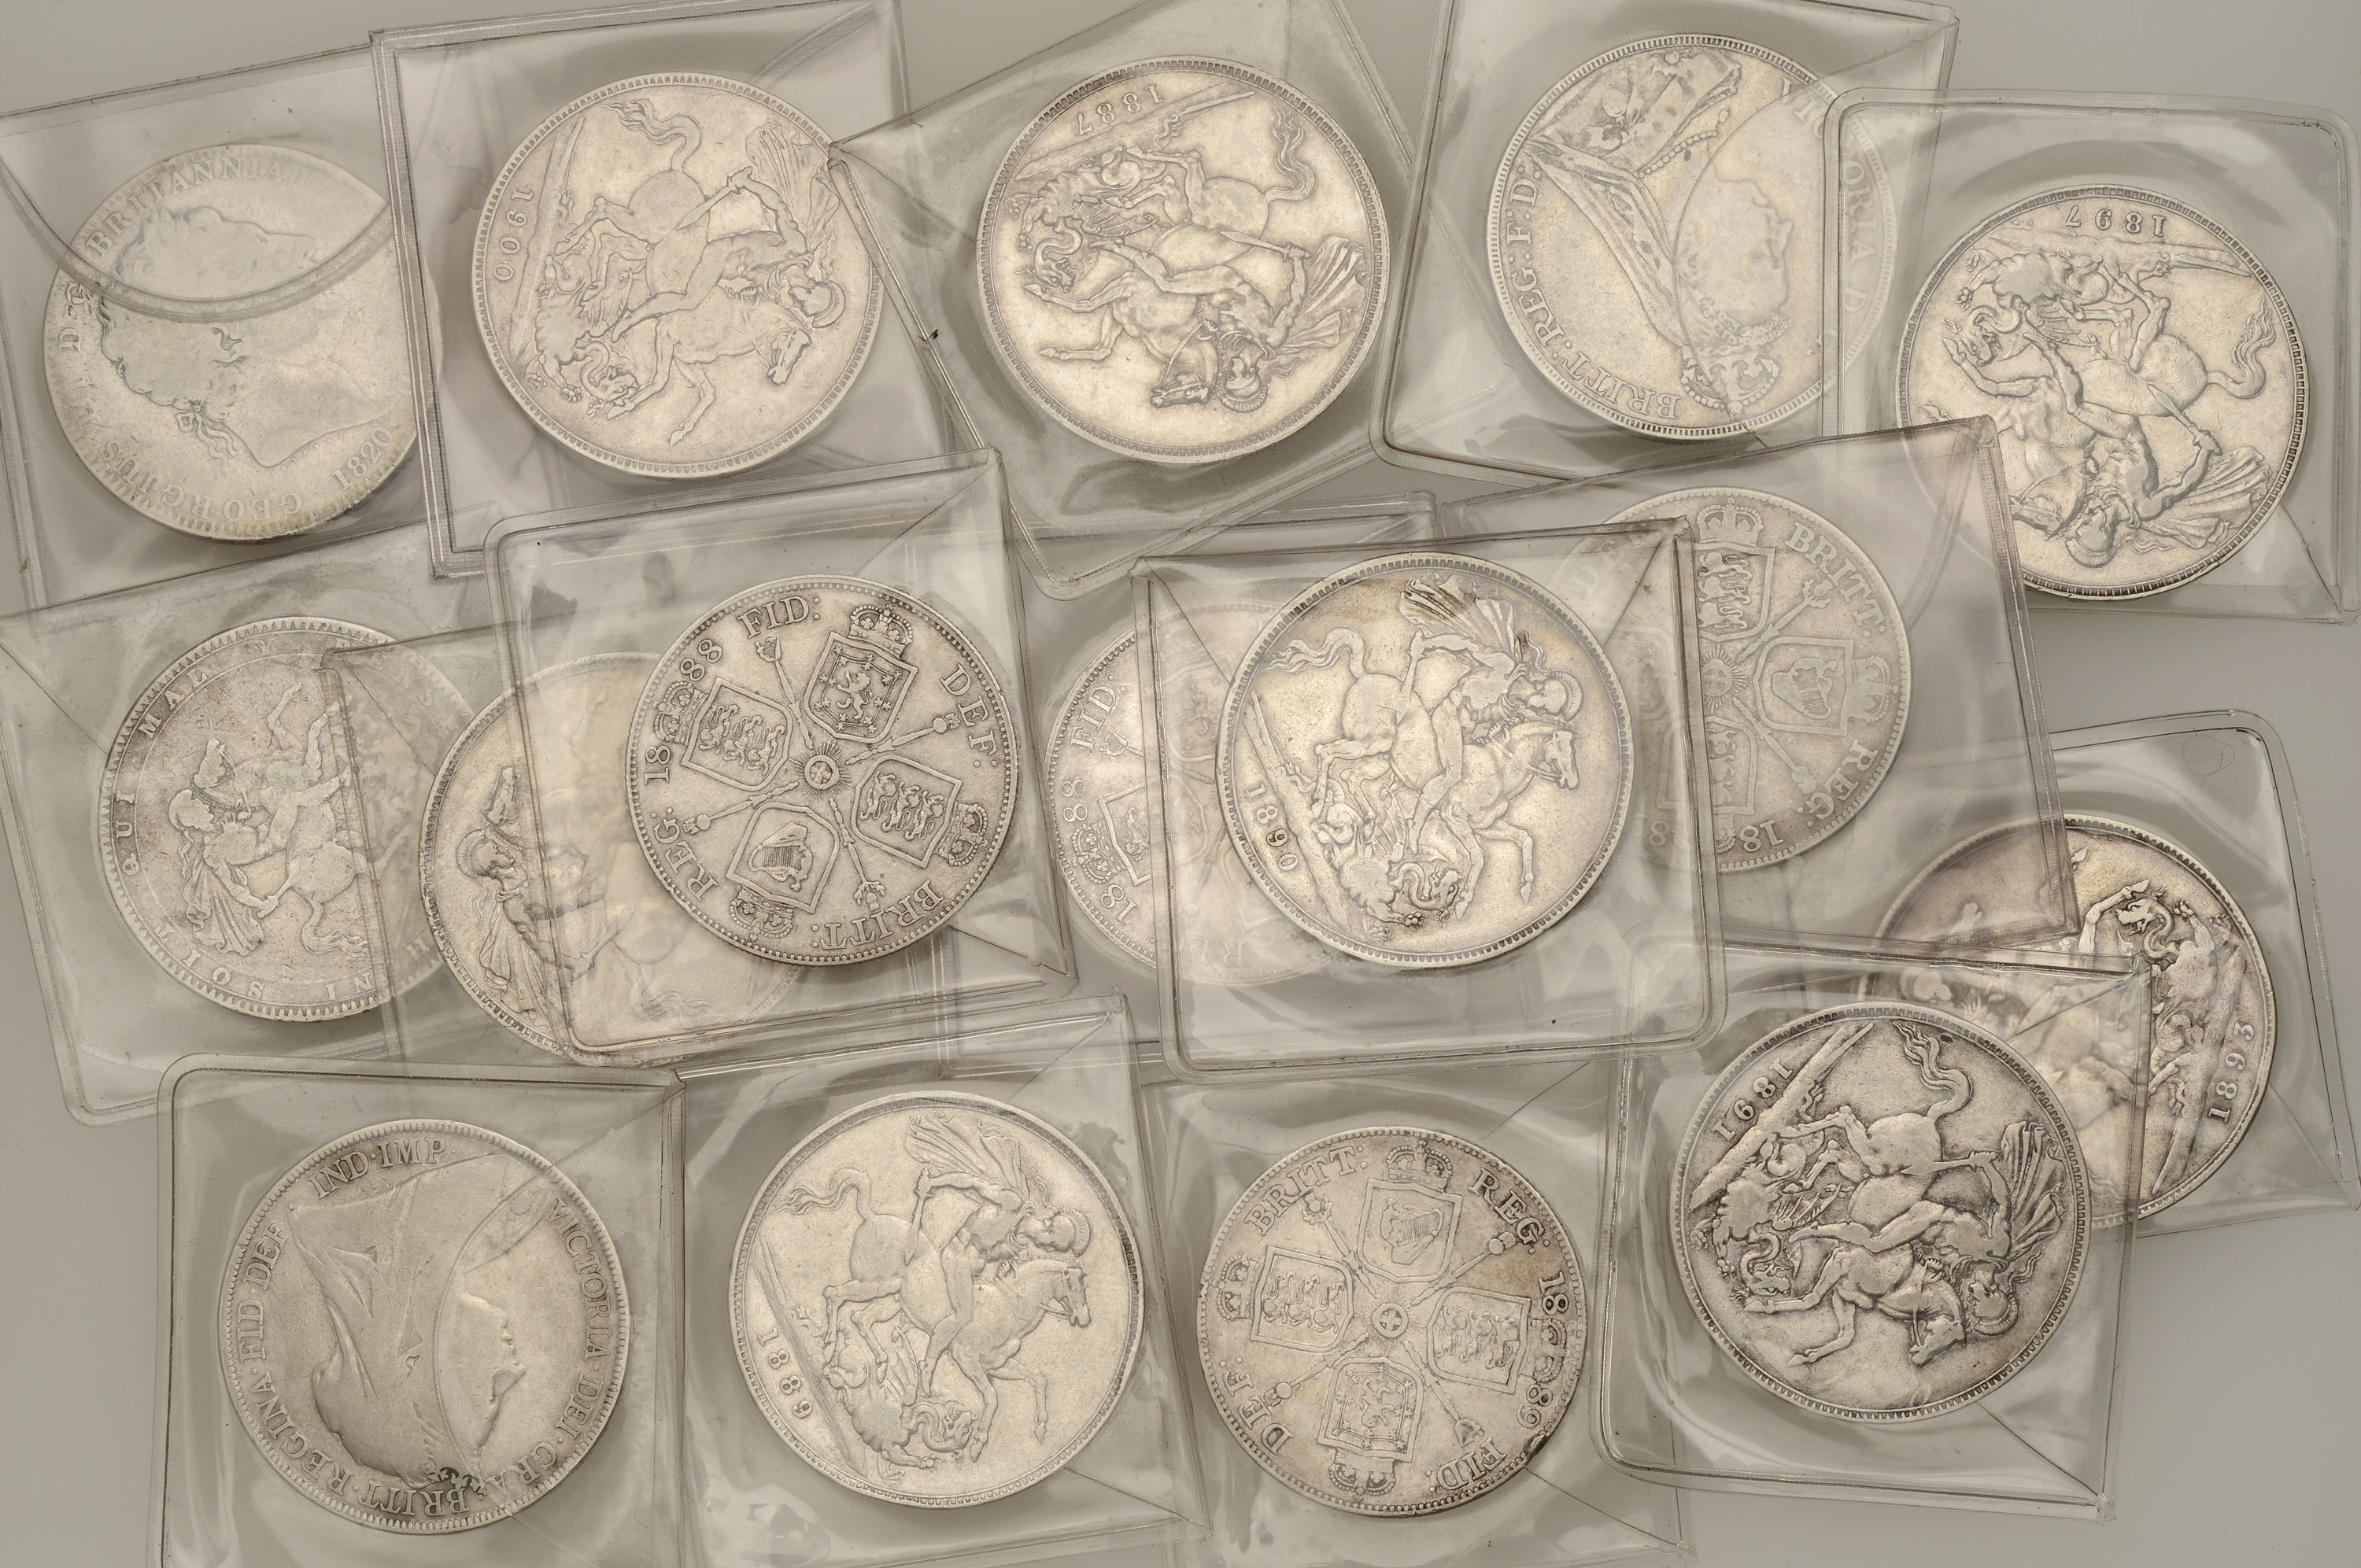 George III to Victoria, Crowns (12), 1819, 1820, 1887, 1889 (2), 1890 (2), 1891, 1983, 1896,...